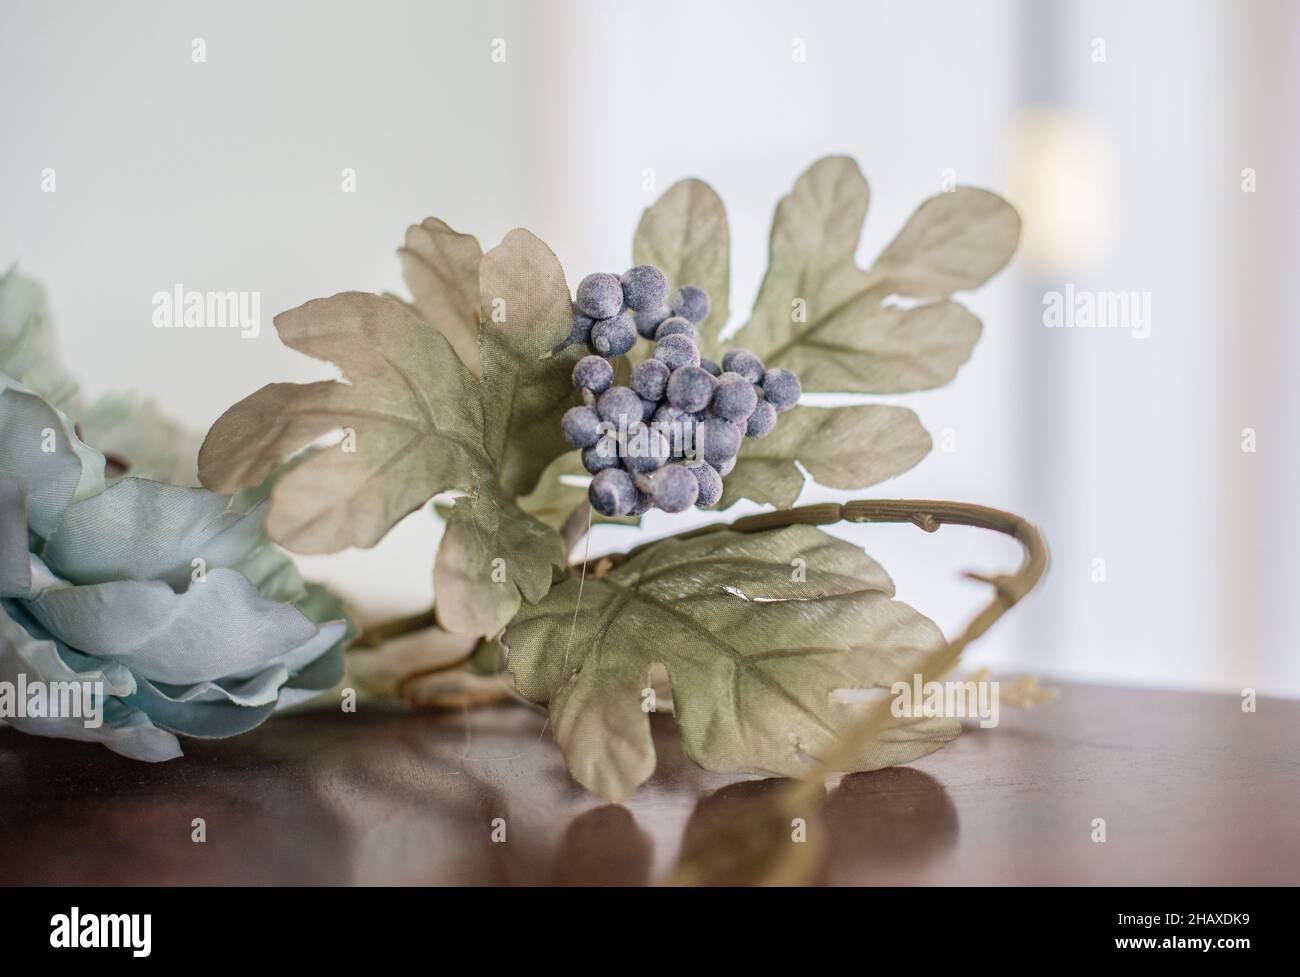 Fake blueberry and leave decorations Stock Photo